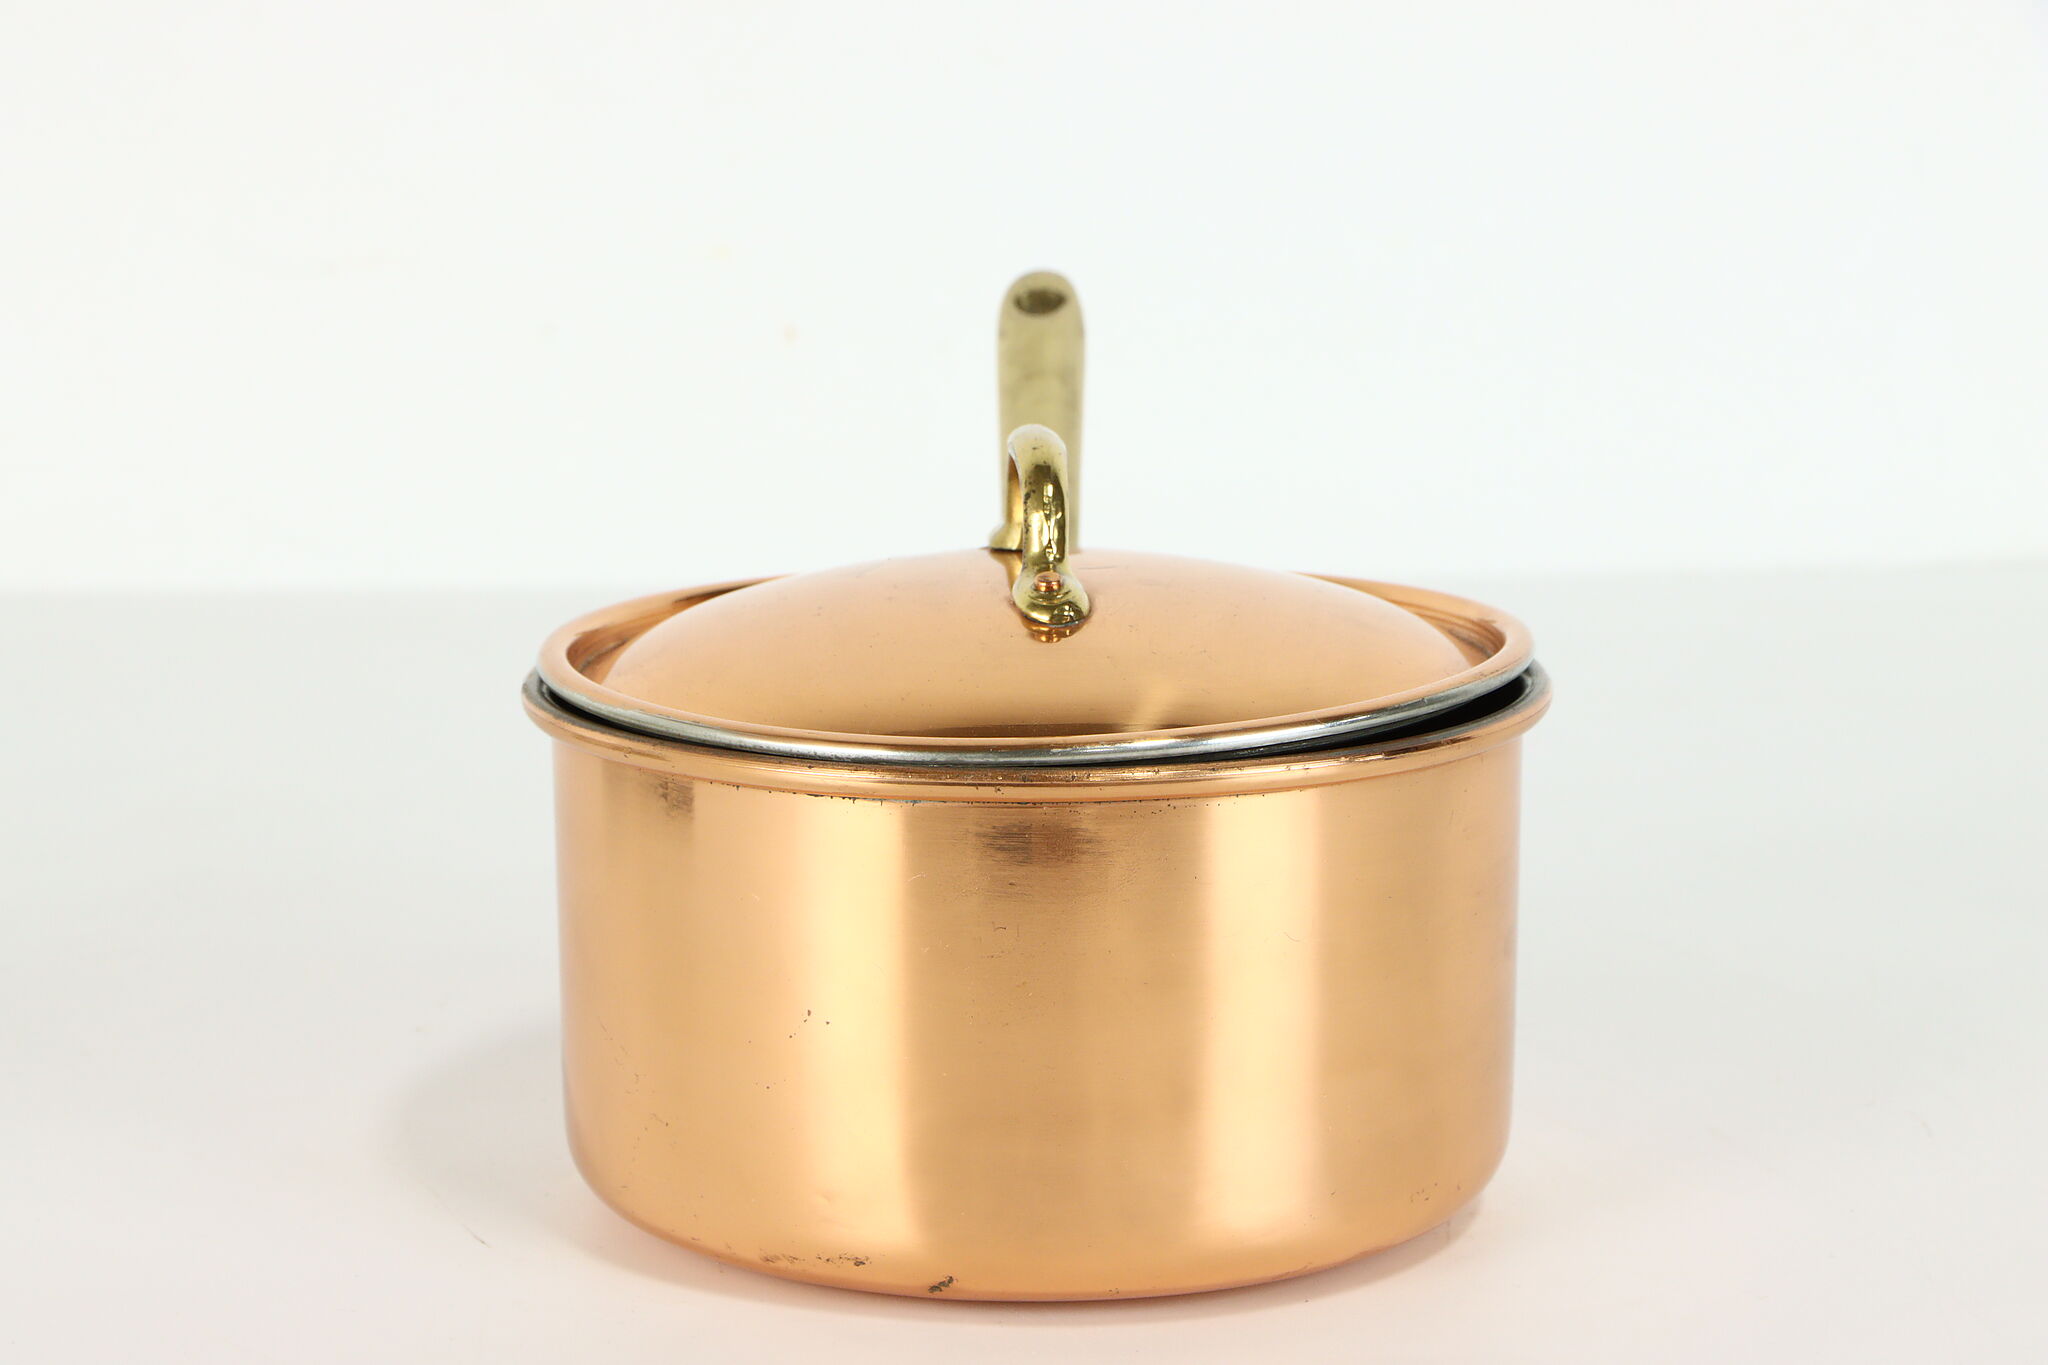 Traditional Copper Saucepan Made in Portugal